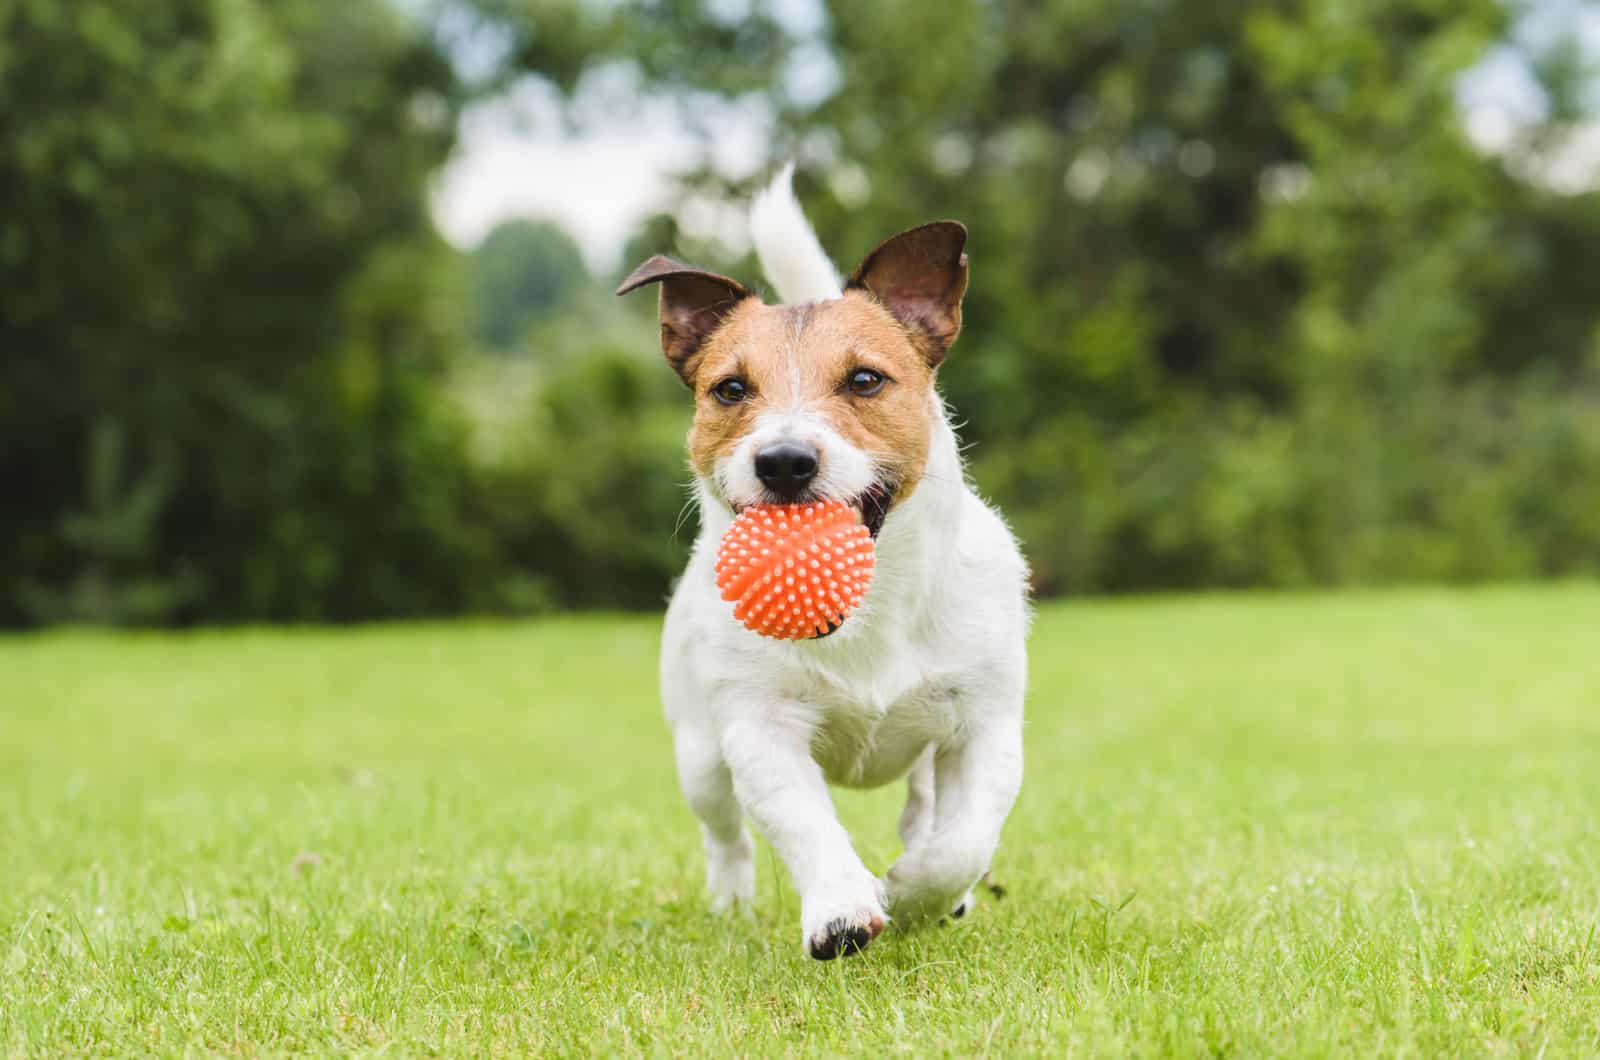 dog running with a ball in his mouth